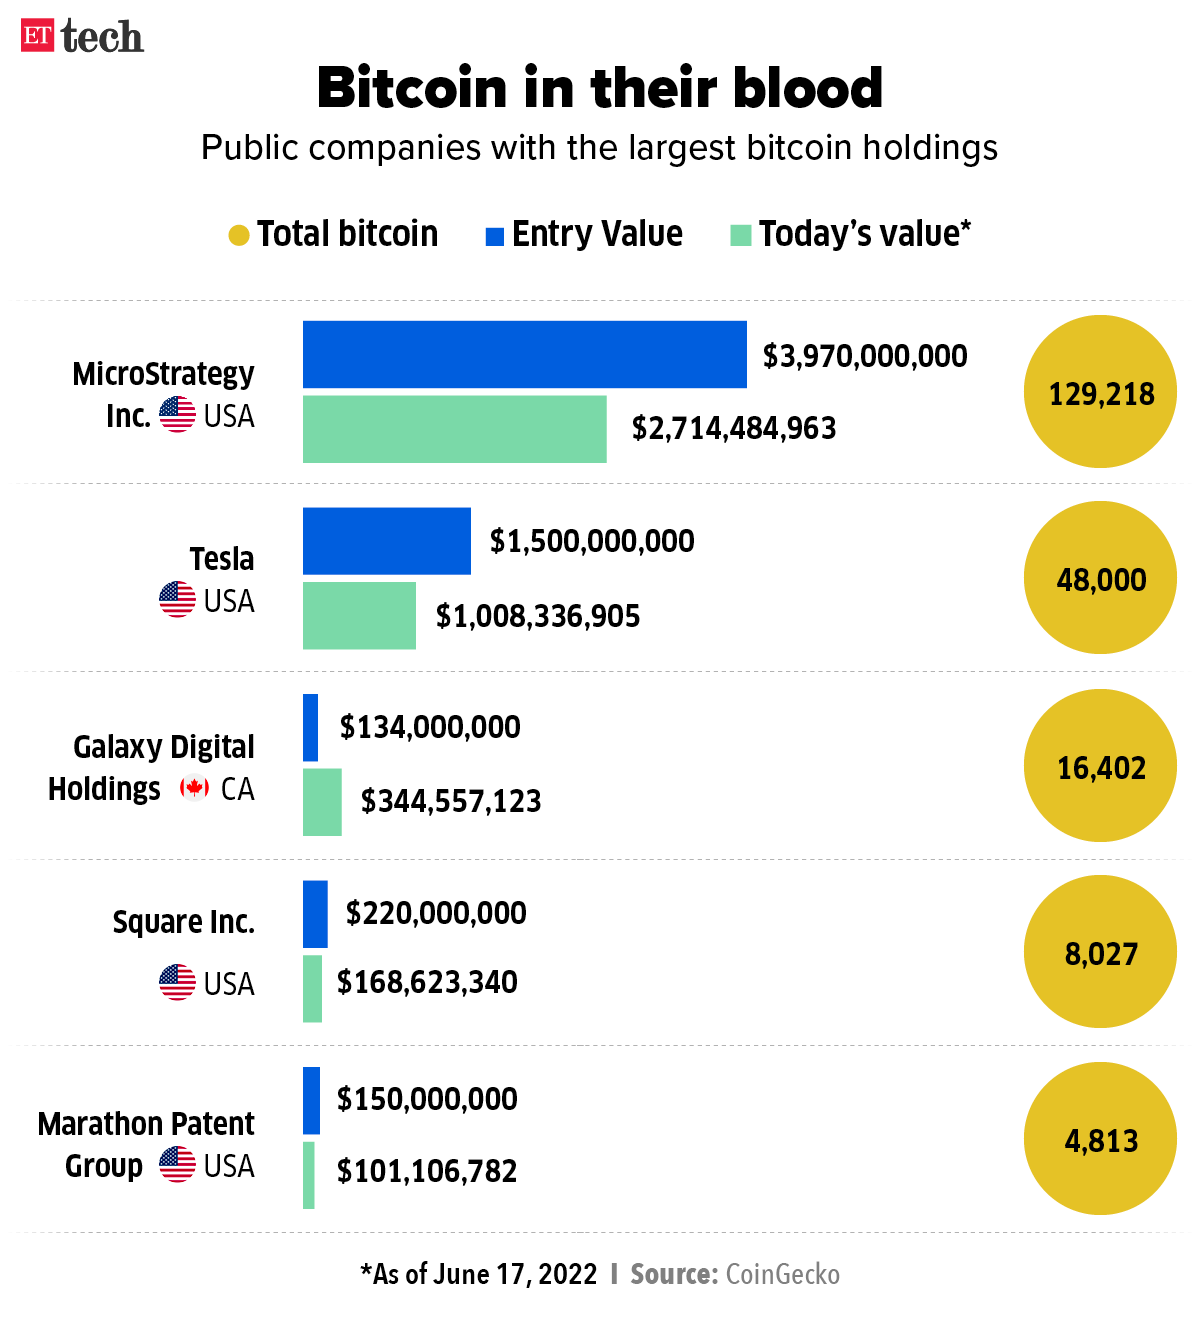 who owns most bitcoins